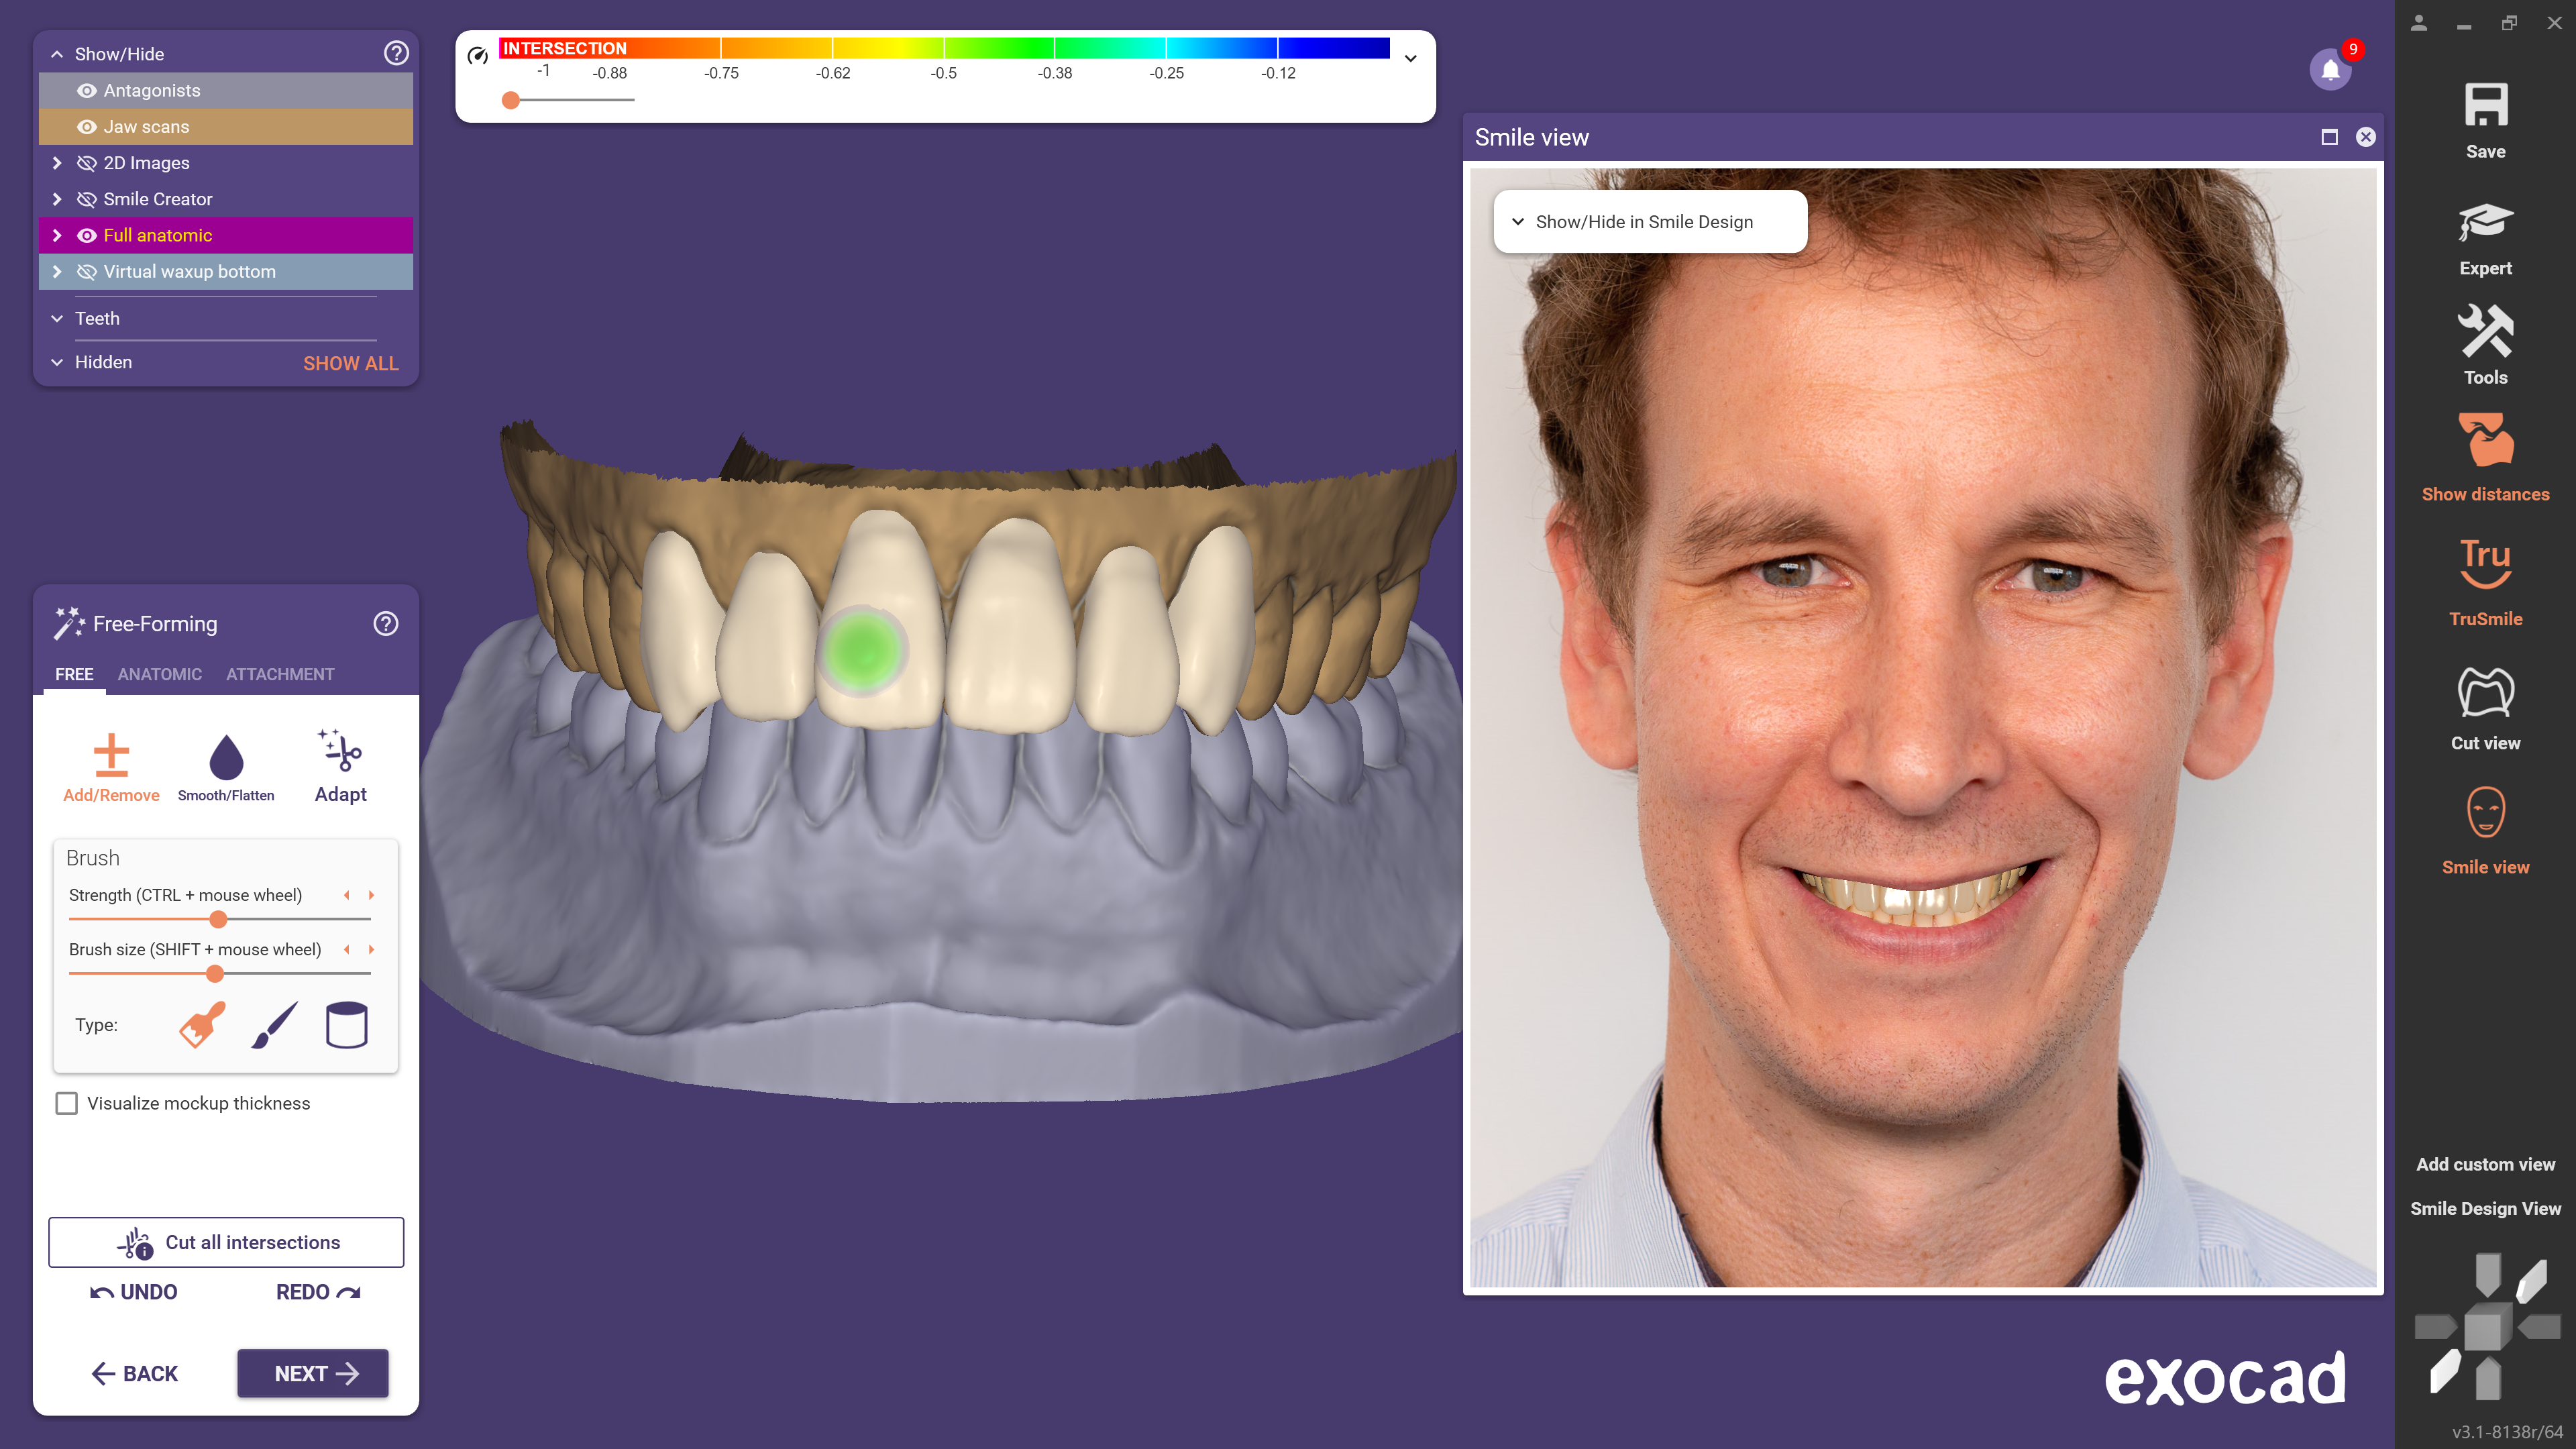 Smile Window shows a 2D preview of the finished smile design like it will appear in the patient’s mouth. (Image: exocad)